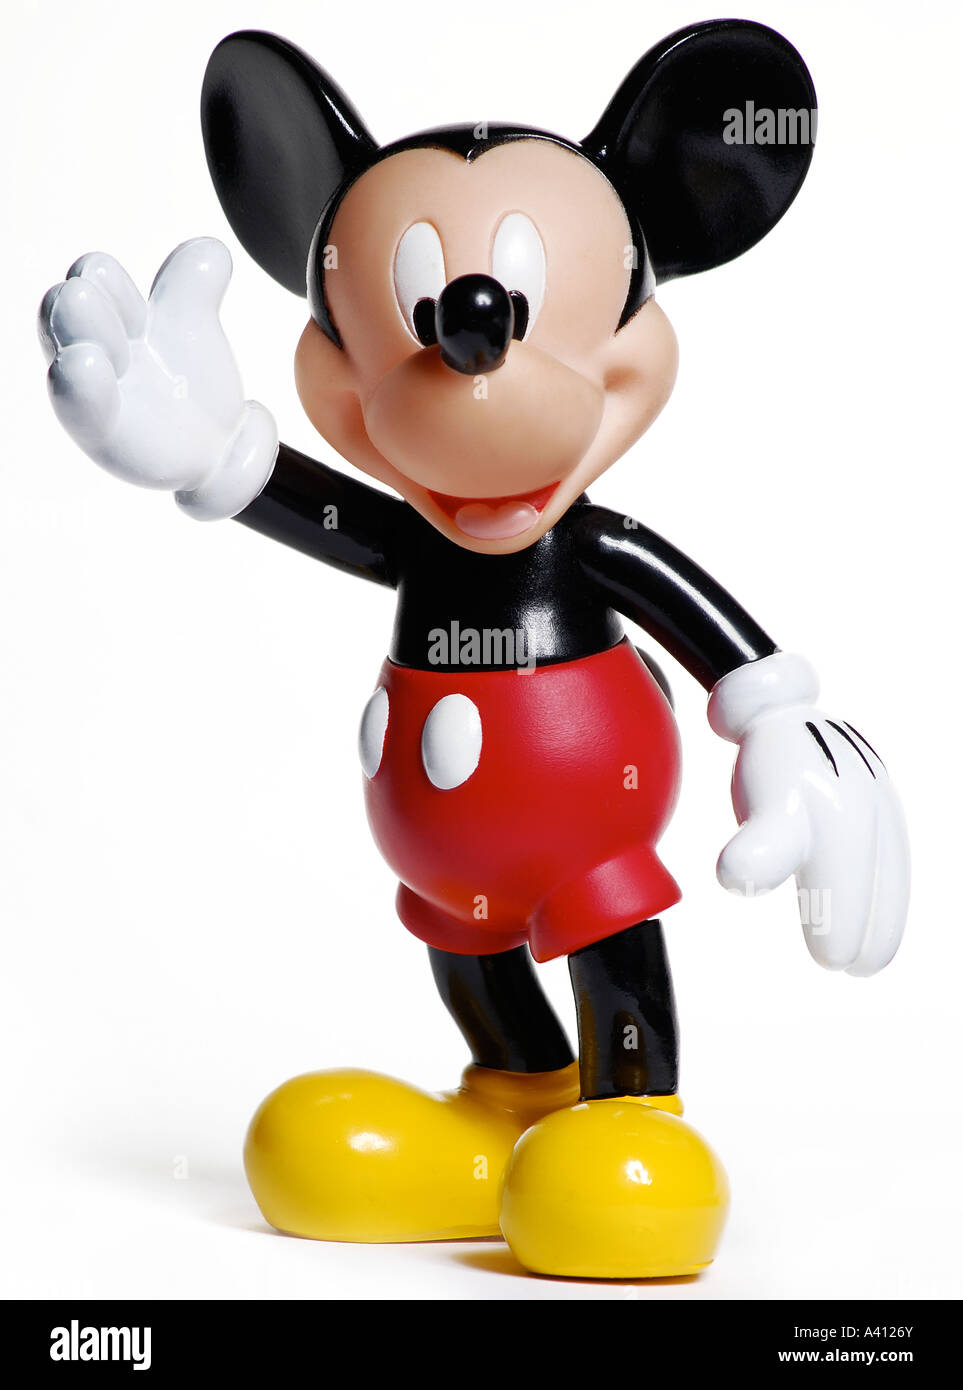 1,135 Micky Mouse Images, Stock Photos, 3D objects, & Vectors